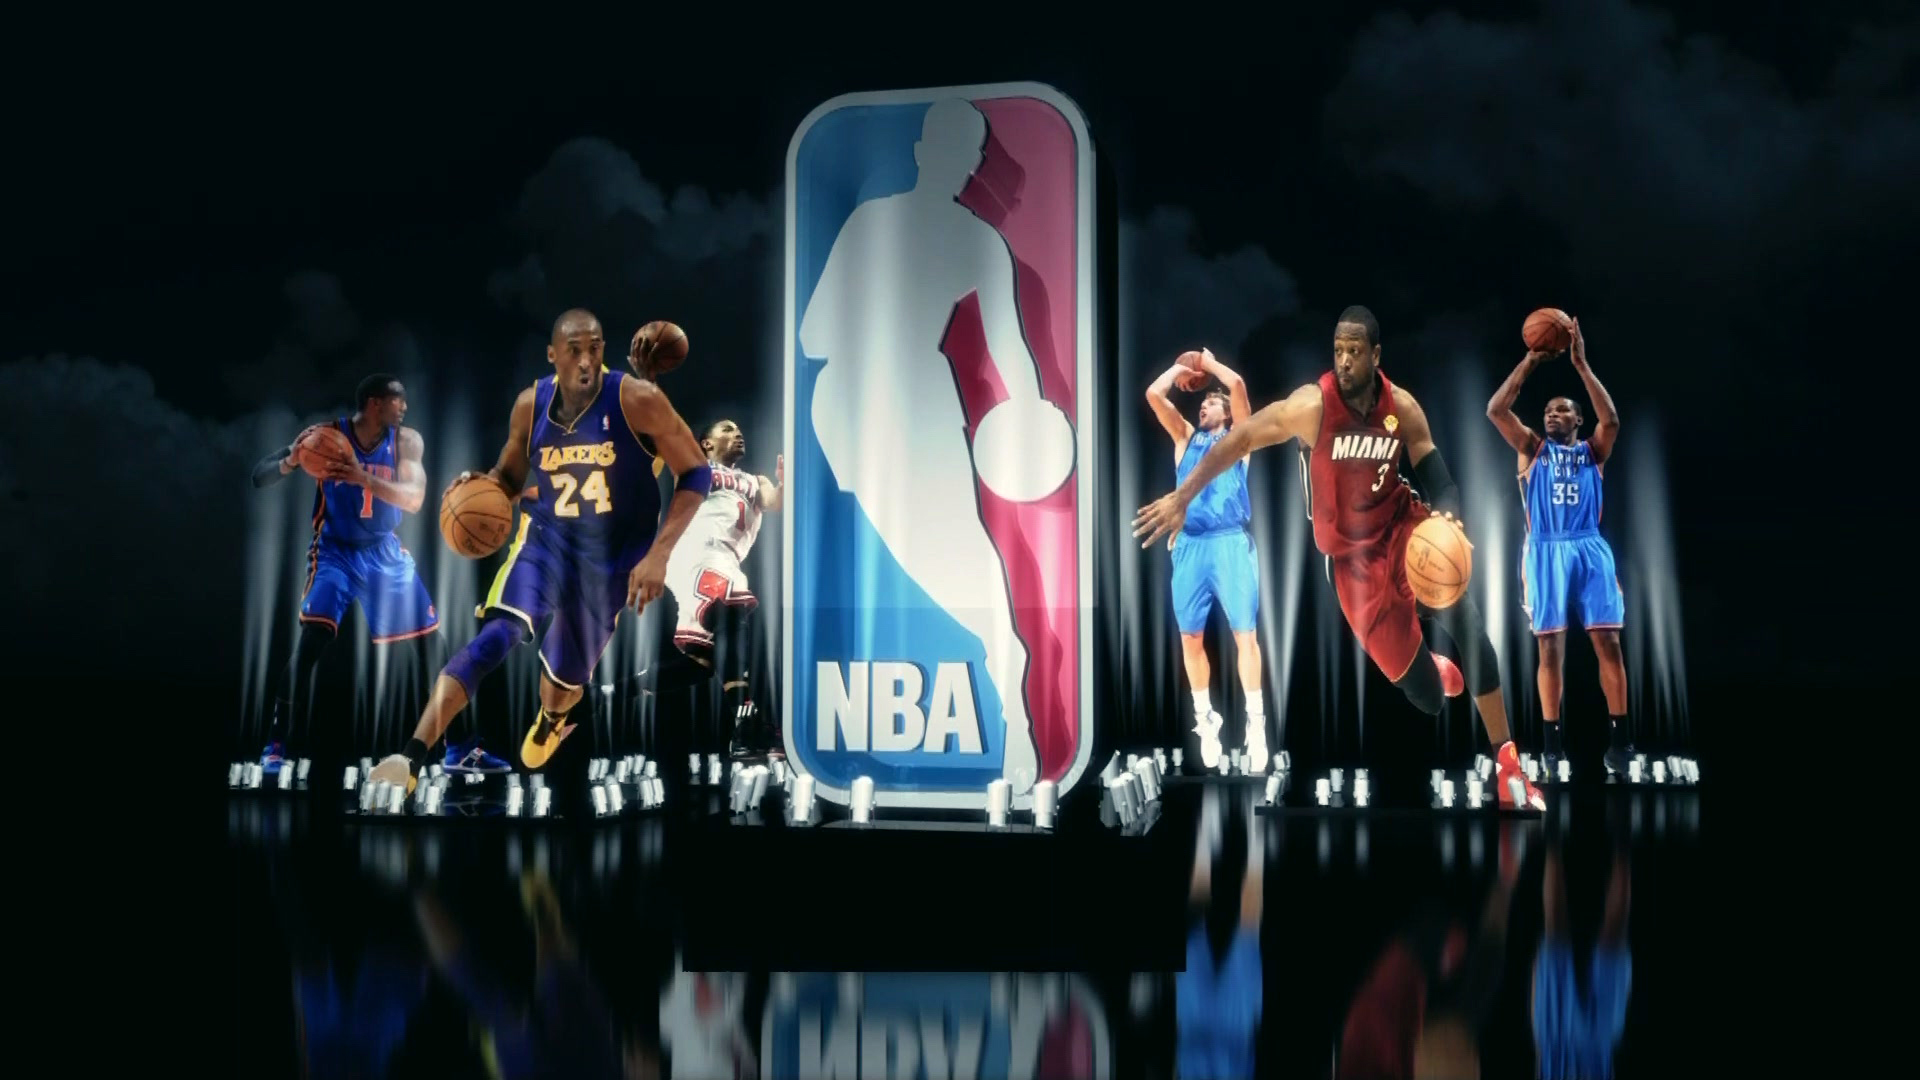 nba wallpaper hd,performance,entertainment,performing arts,stage,musical theatre